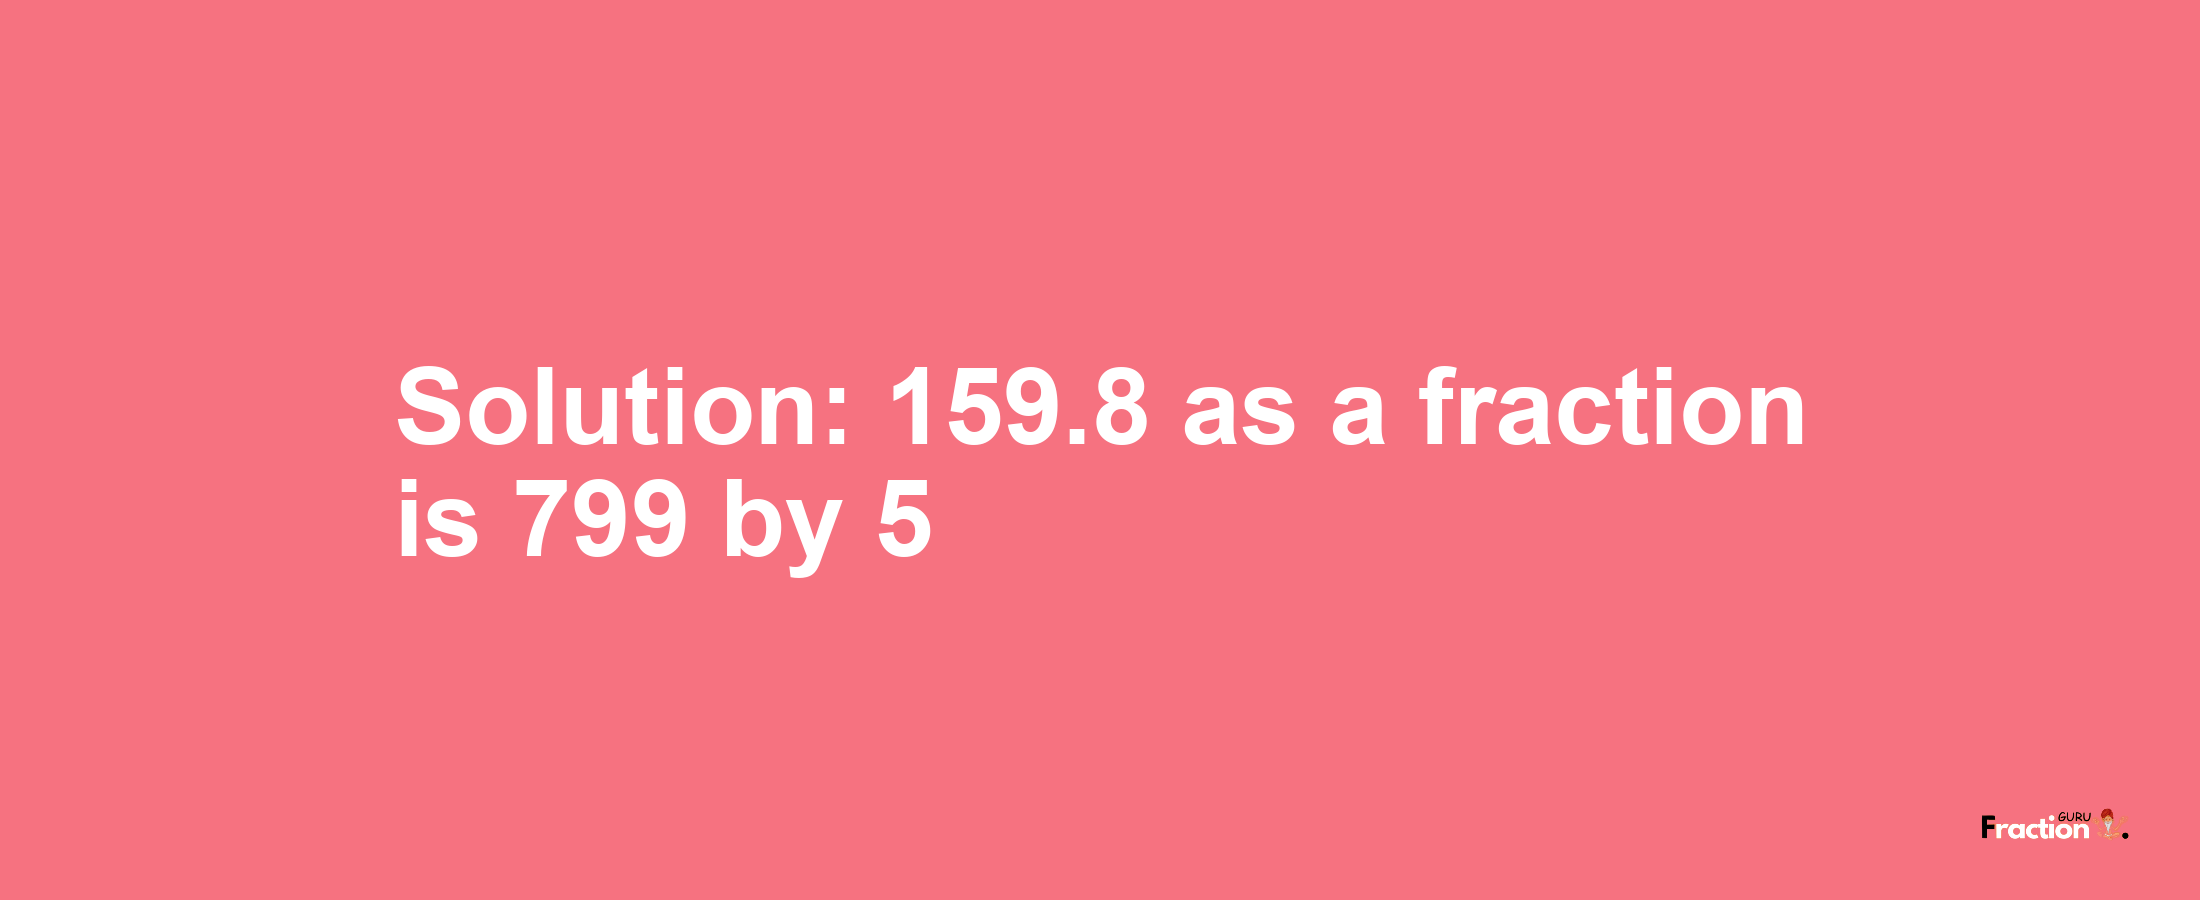 Solution:159.8 as a fraction is 799/5